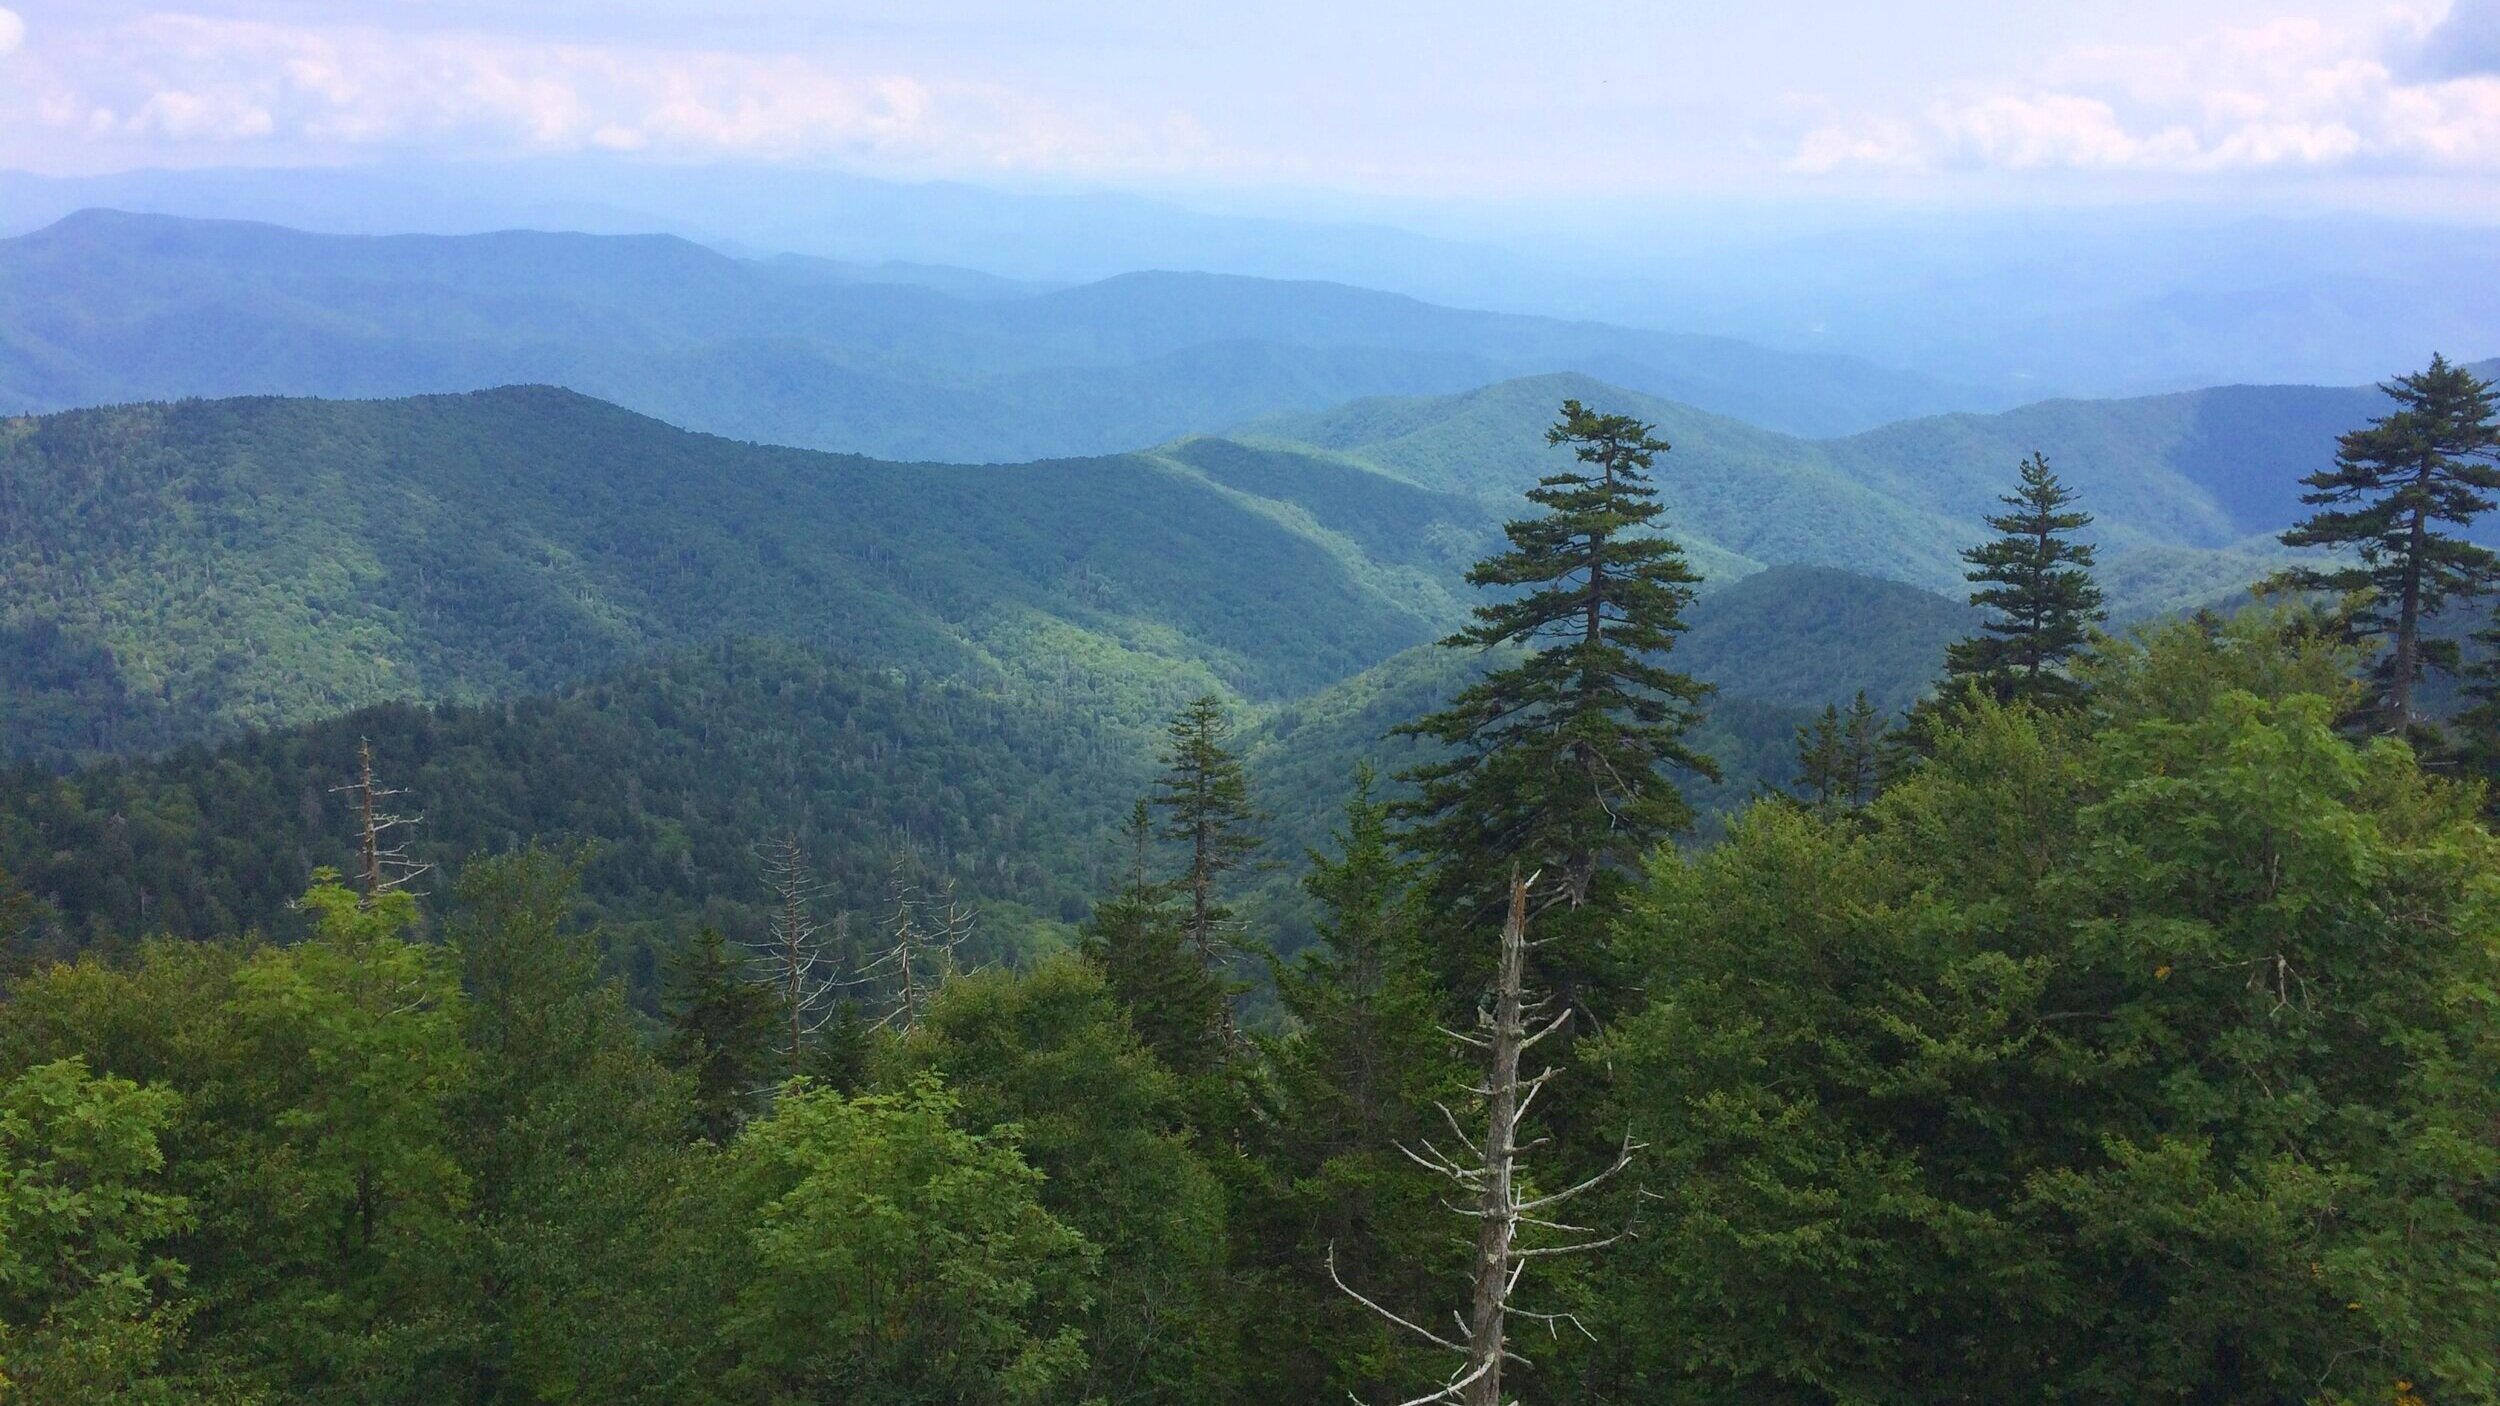 Camping & Hiking in Great Smoky Mountains National Park — One More Step